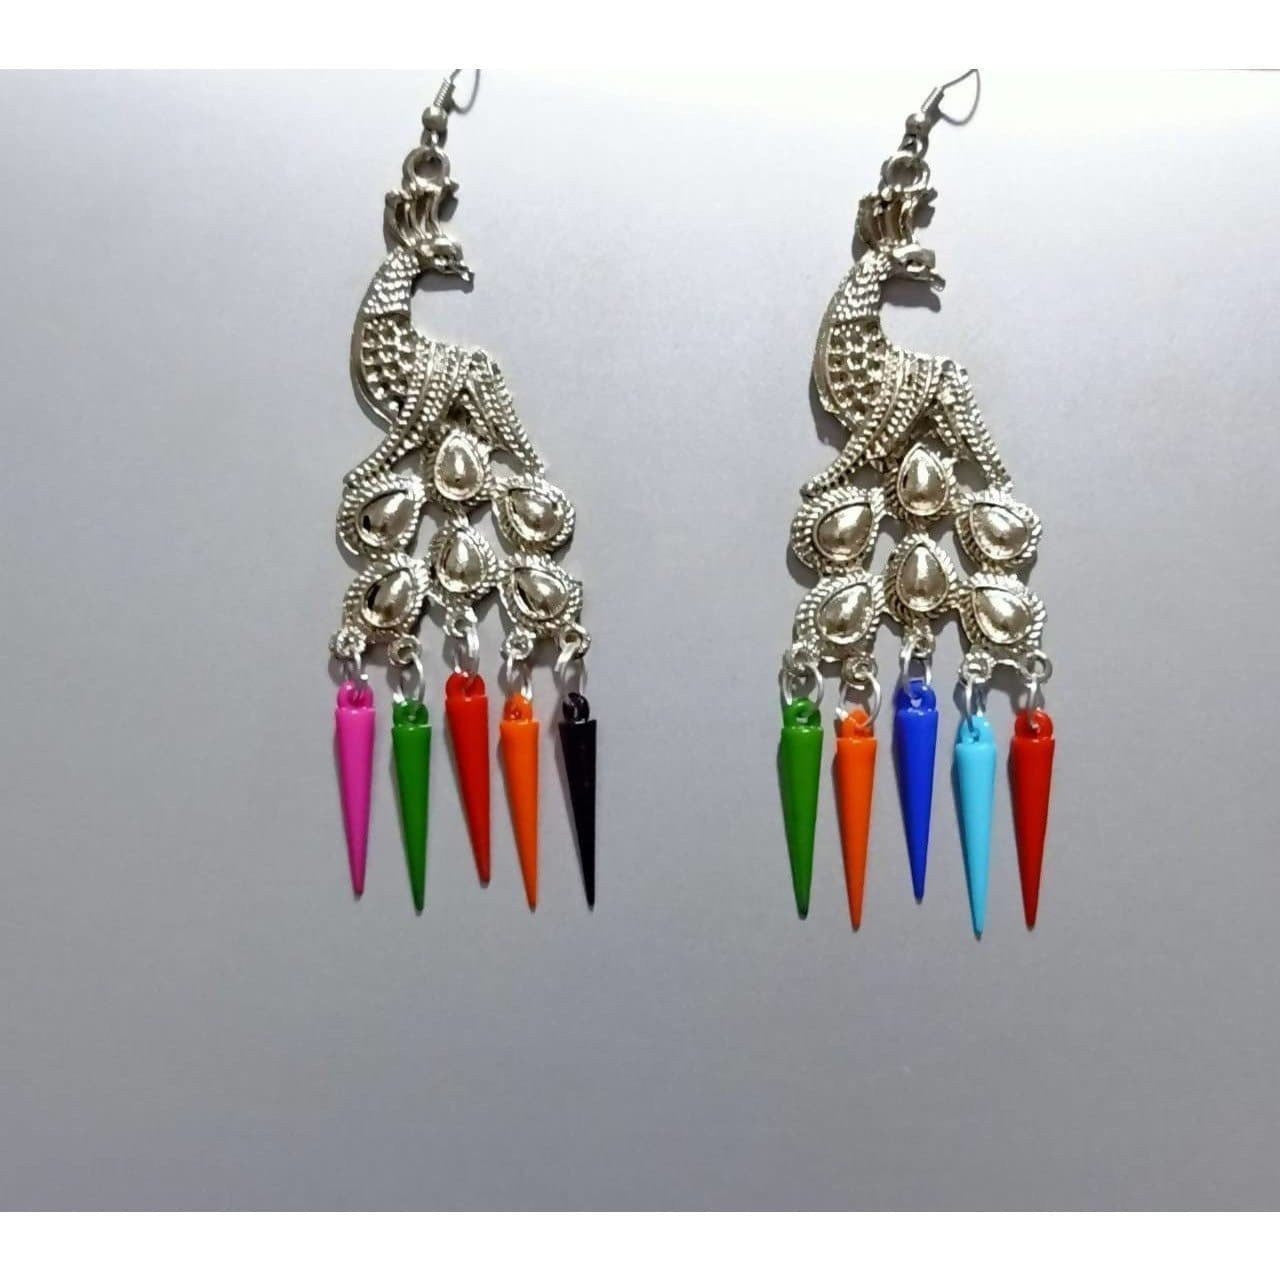 Latest Fashion Peacock Silver Oxidized Earrings With Hanging Pearls